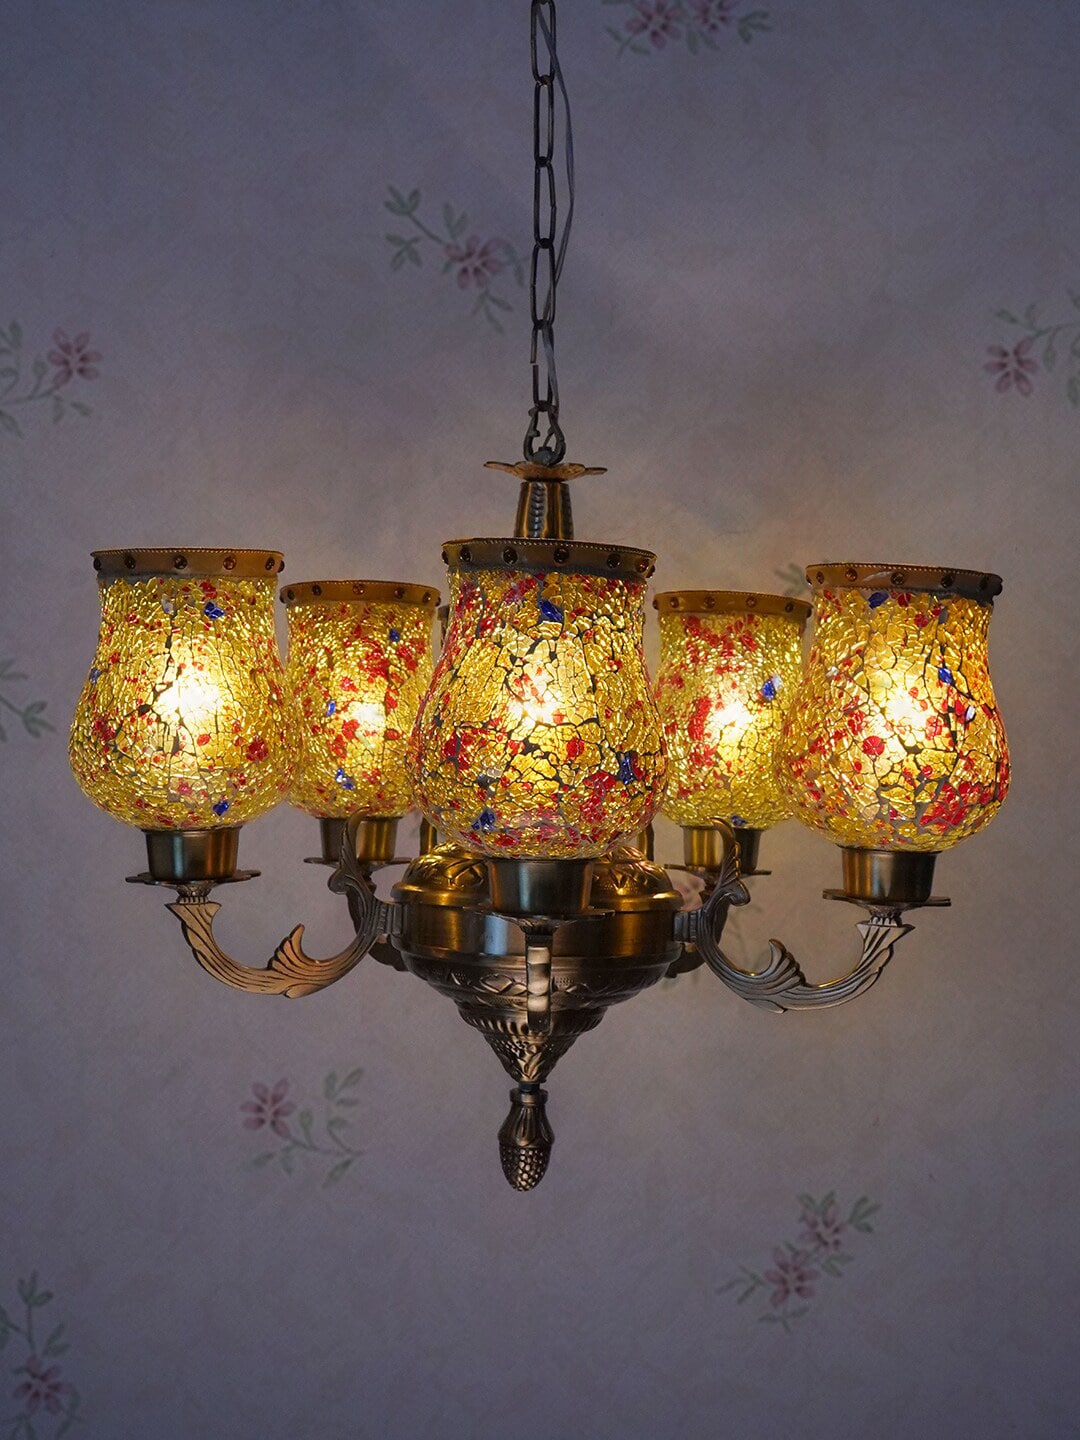 Fos Lighting Gold-Toned & Yellow Self Design Antique Cluster Light Price in India